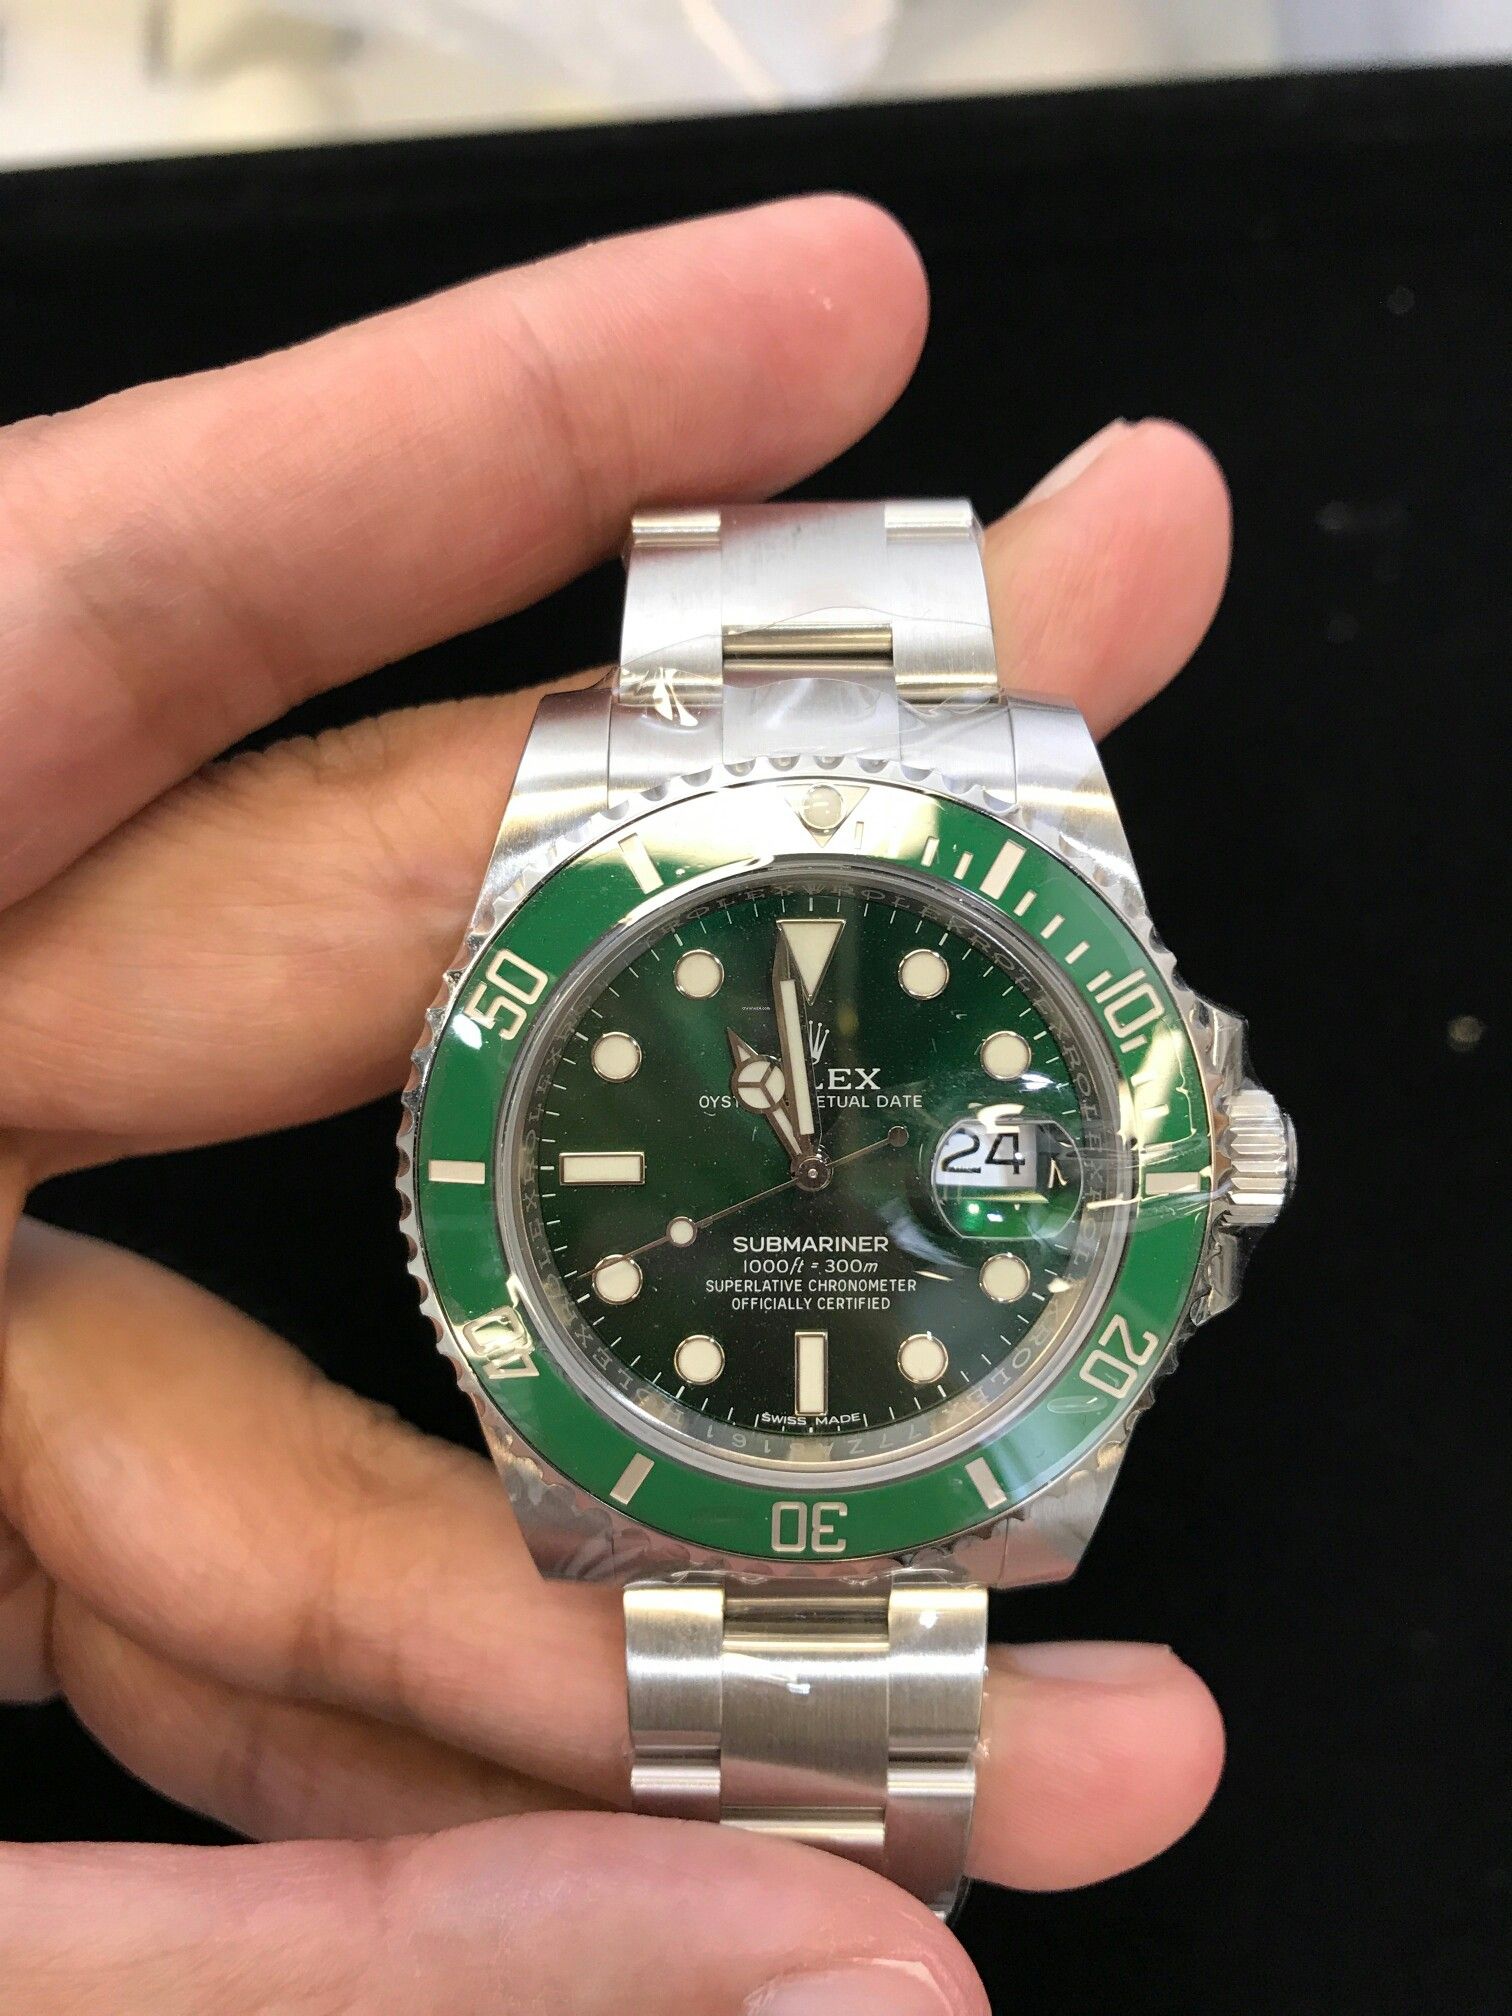 Submariner(date)- Stainless Steel Green-Automatic-116610LV